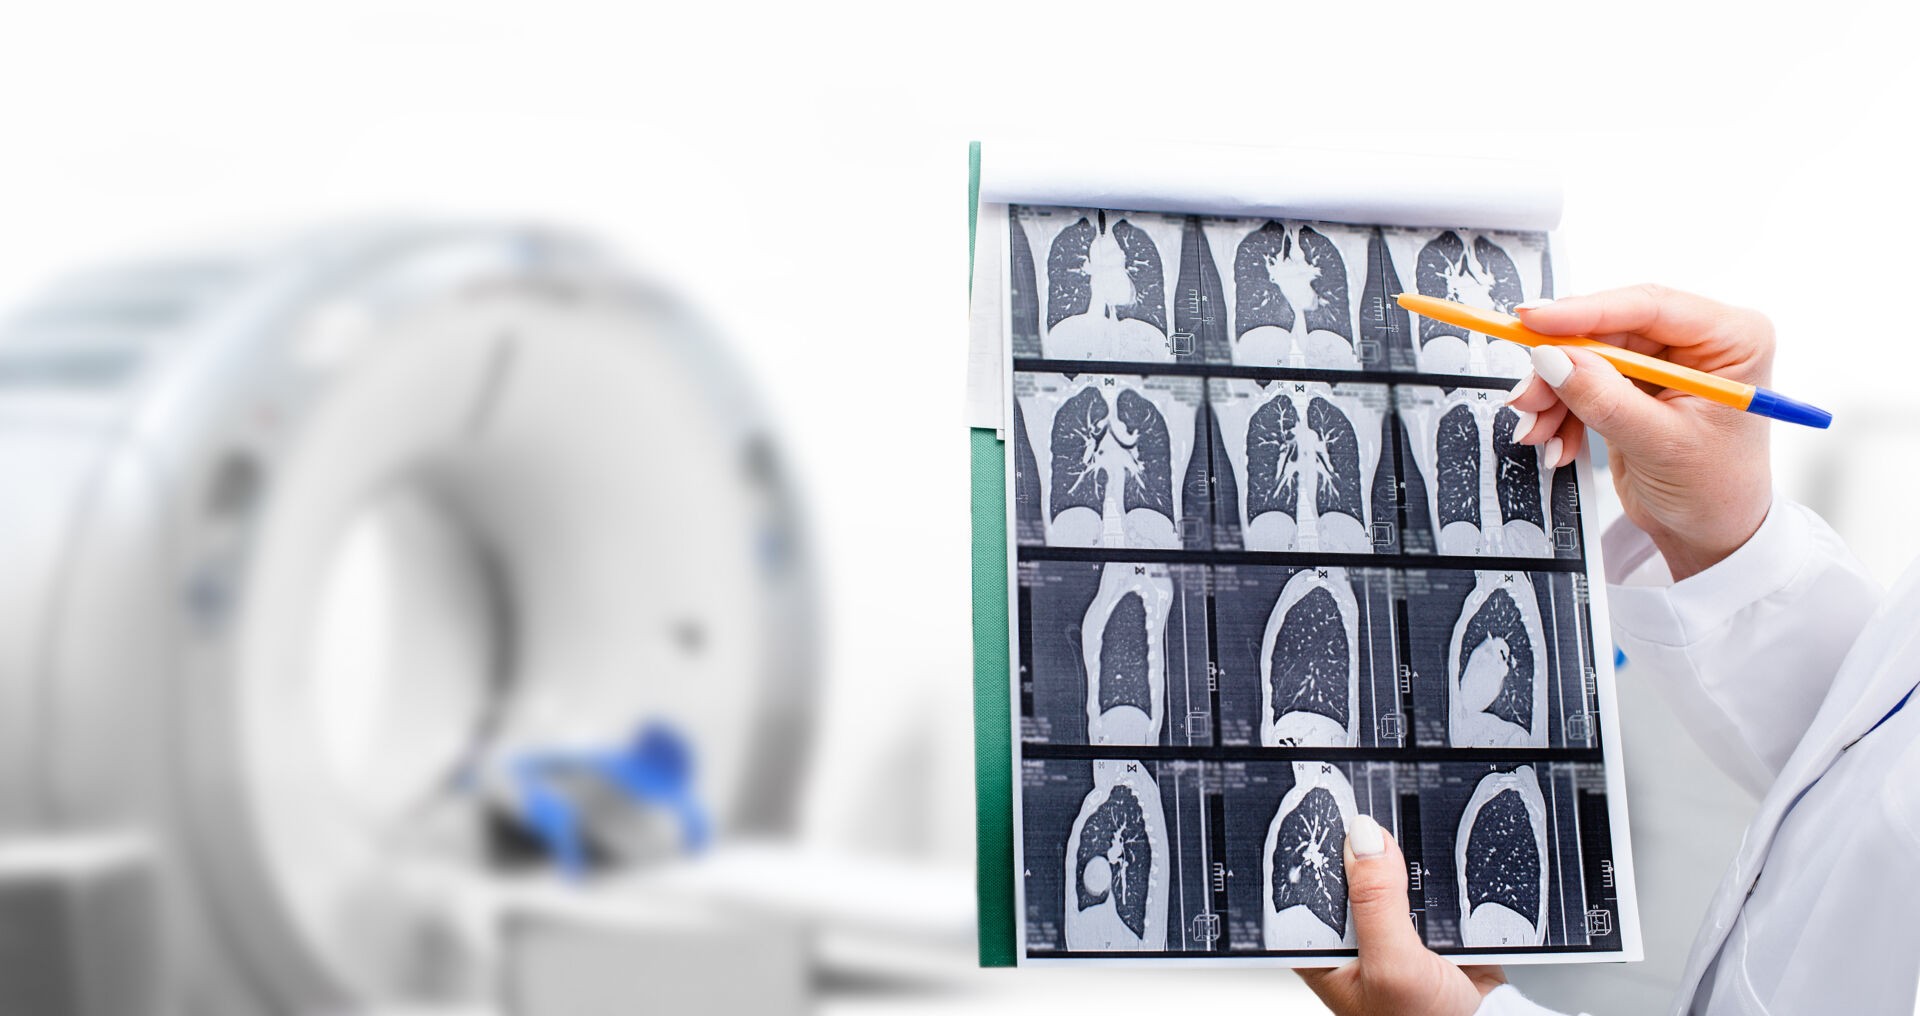 Lung cancer risk 10-fold higher in non-recommended screening groups